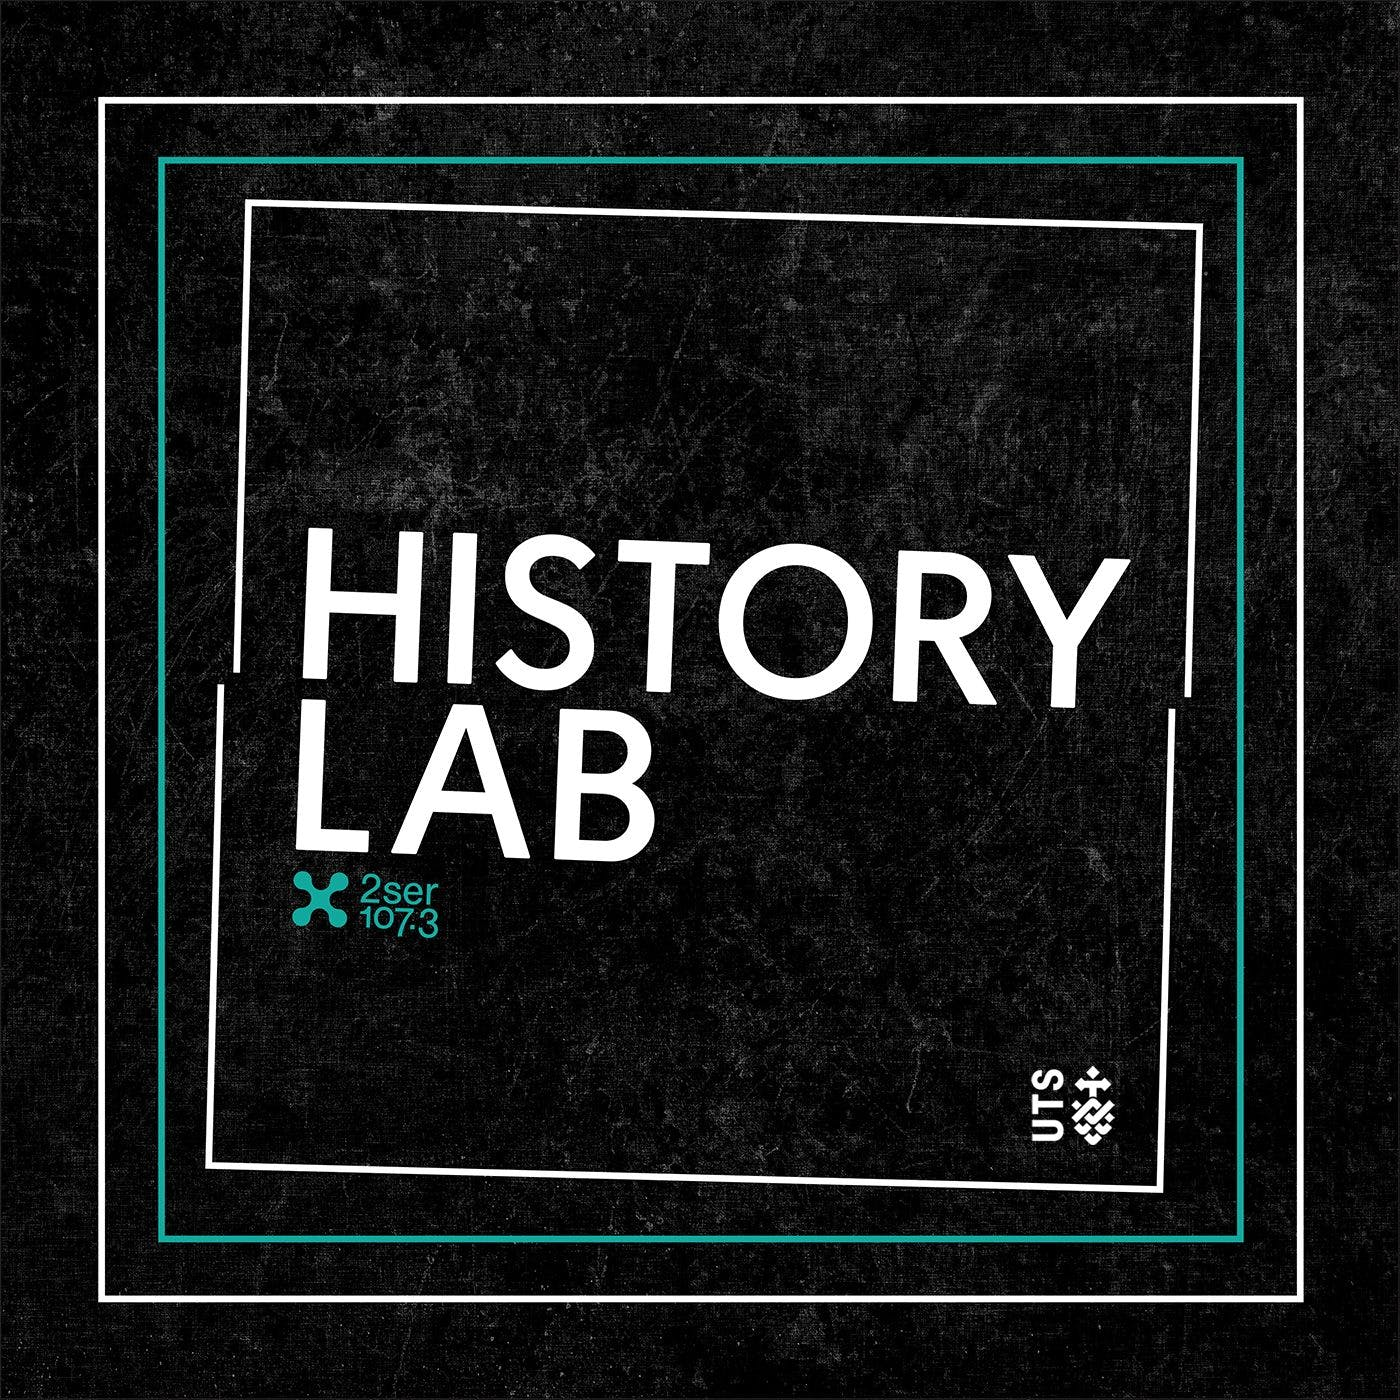 Introducing Season Three of History Lab -  The Law’s Way of Knowing